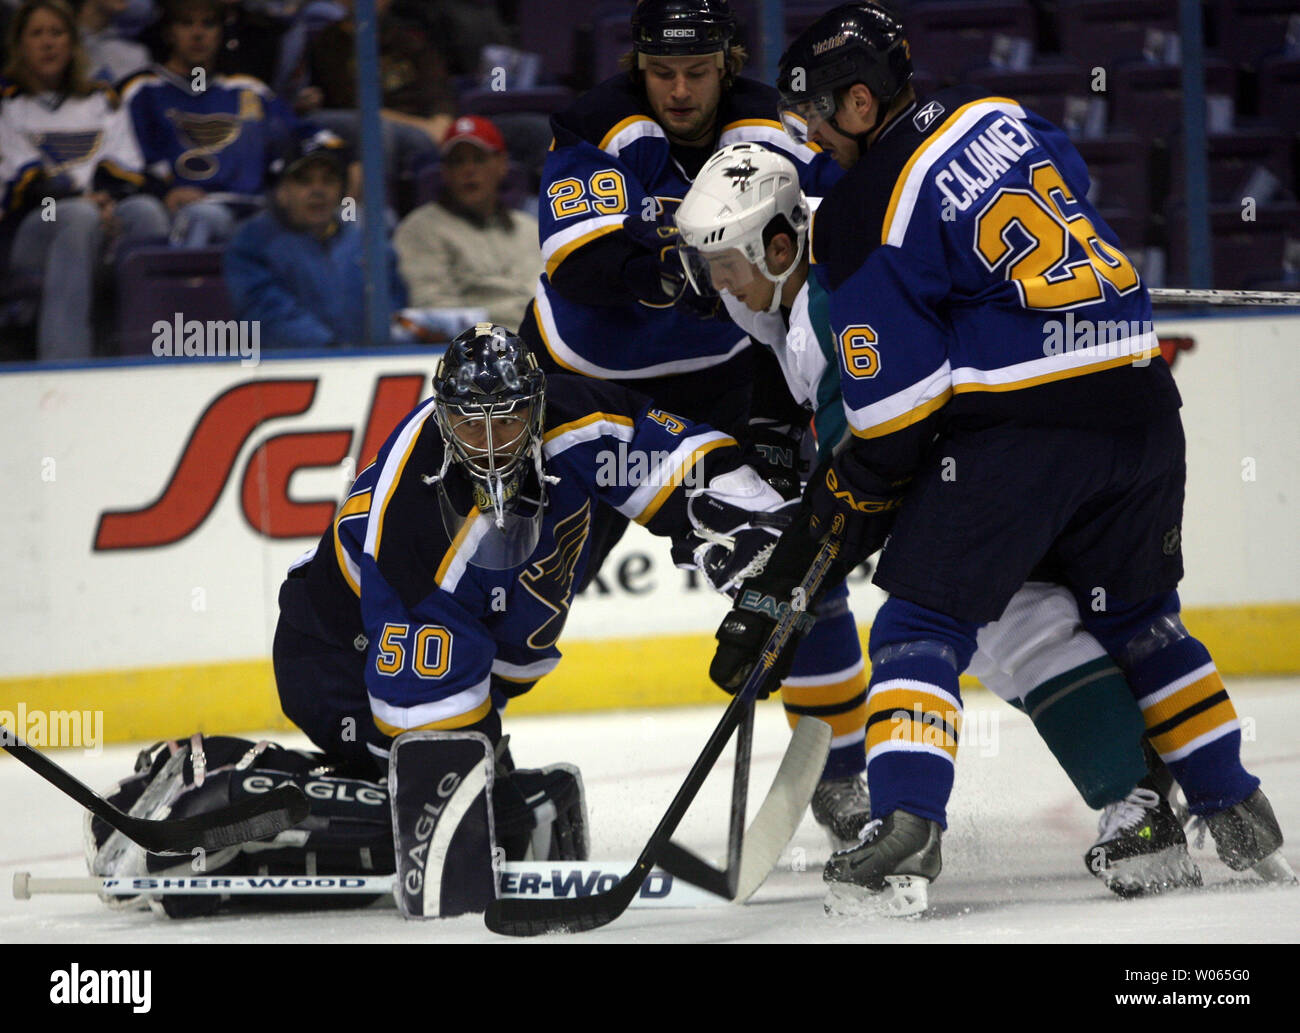 San Jose Sharks Marcel Goc (C) is slowed by St. Louis Blues Jeff Woywitka (29) and Petr Cajanek (26) as Blues goaltender Reinhard Divis knocks the puck clear in the first period at the Savvis Center in St. Louis on March 21, 2006.  (UPI Photo/Bill Greenblatt) Stock Photo